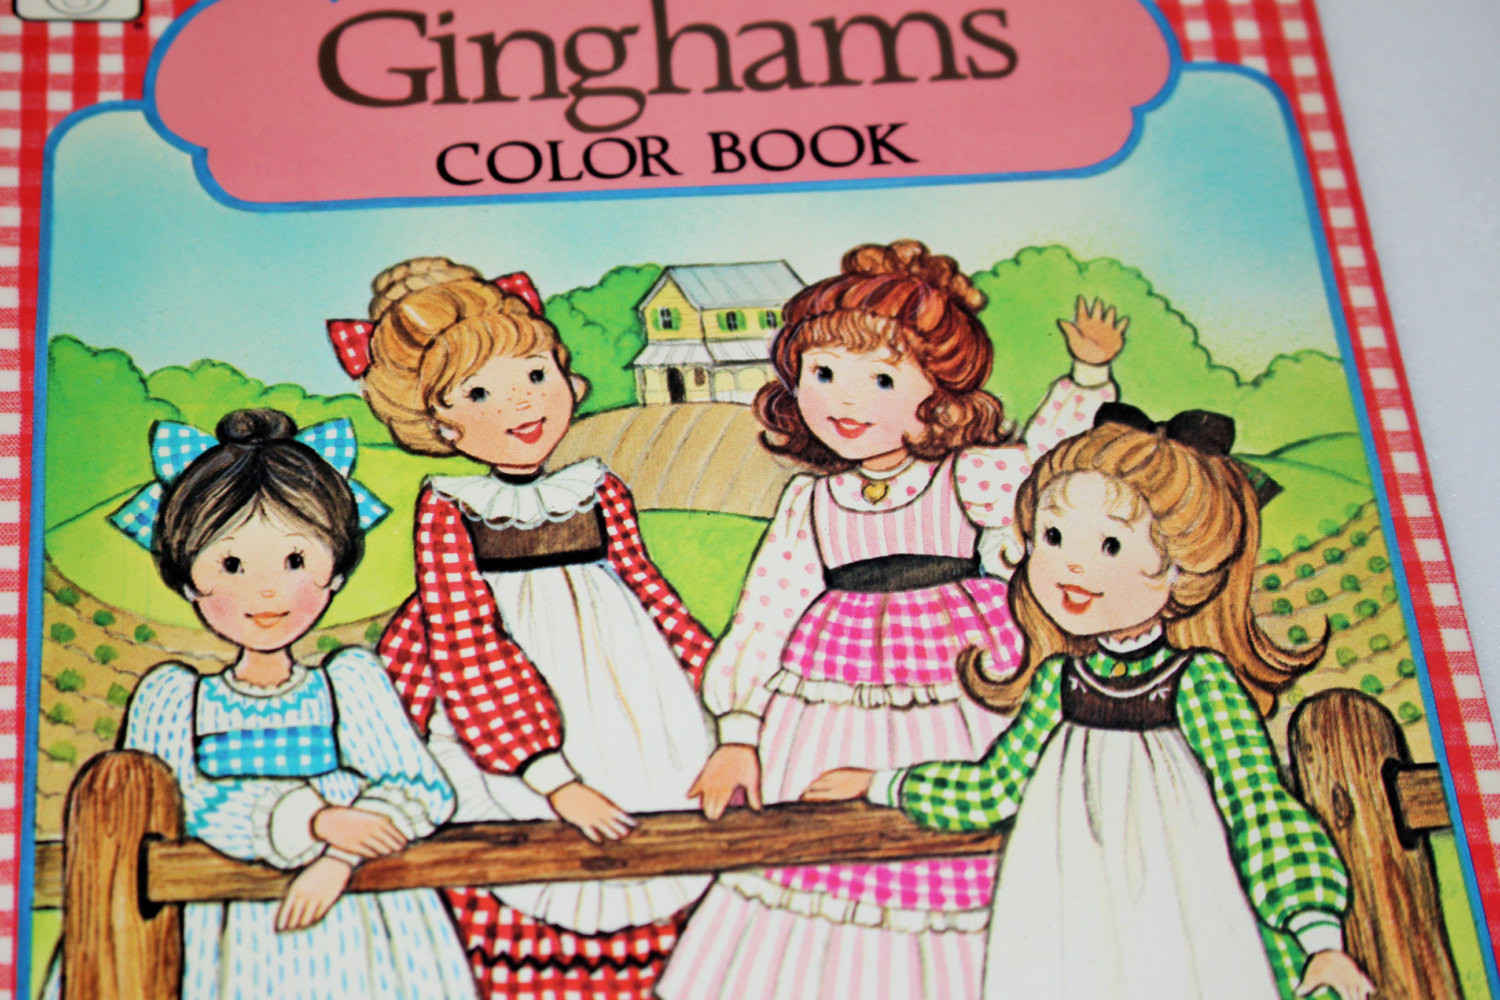 Gingham Girls Coloring Book
 Vintage Coloring Book The Ginghams Coloring Book Doll